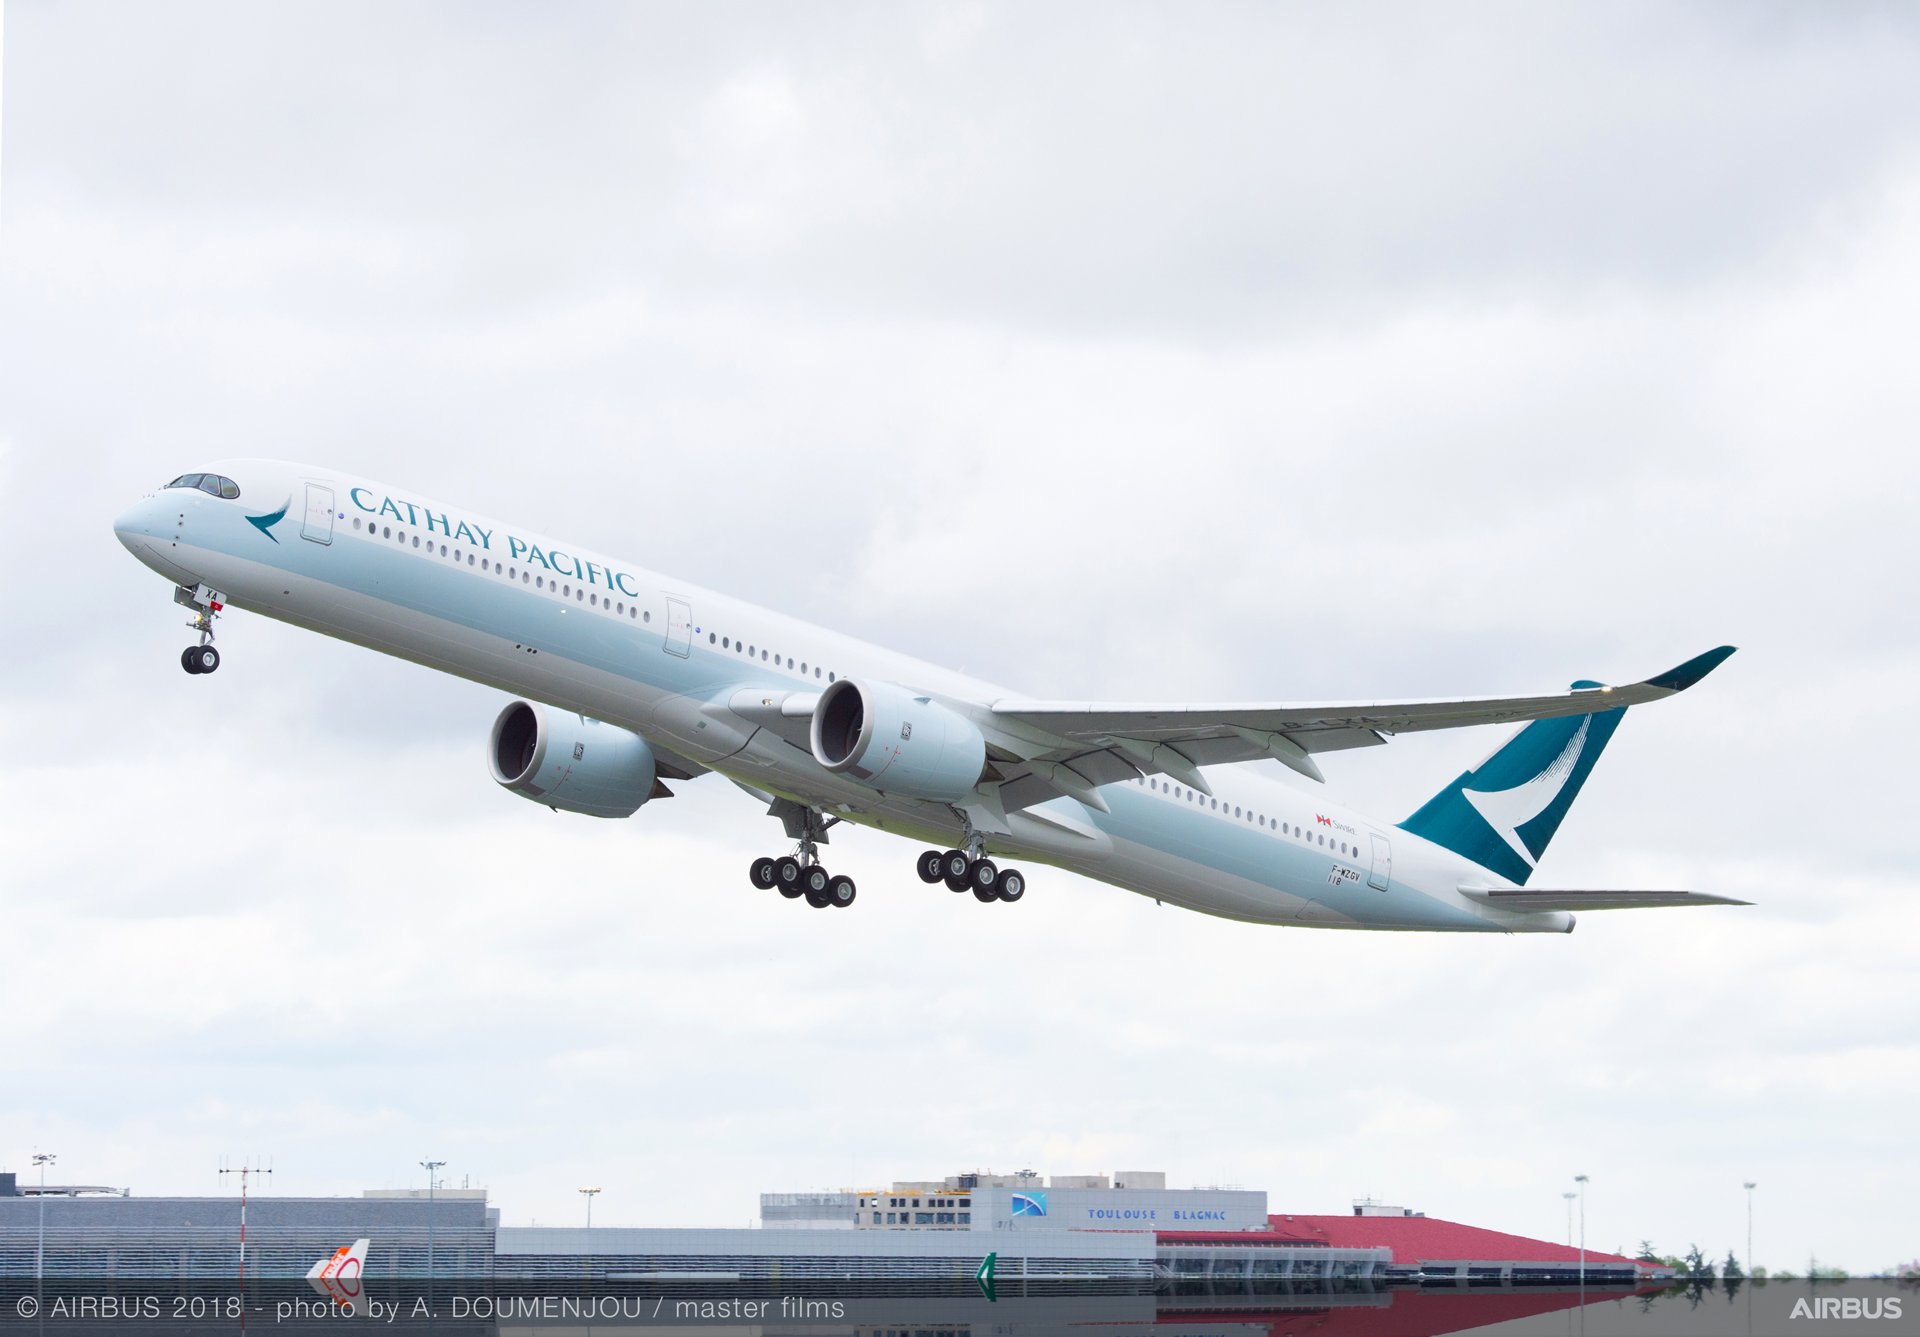 Cathay Pacificâs first A350-1000 delivered